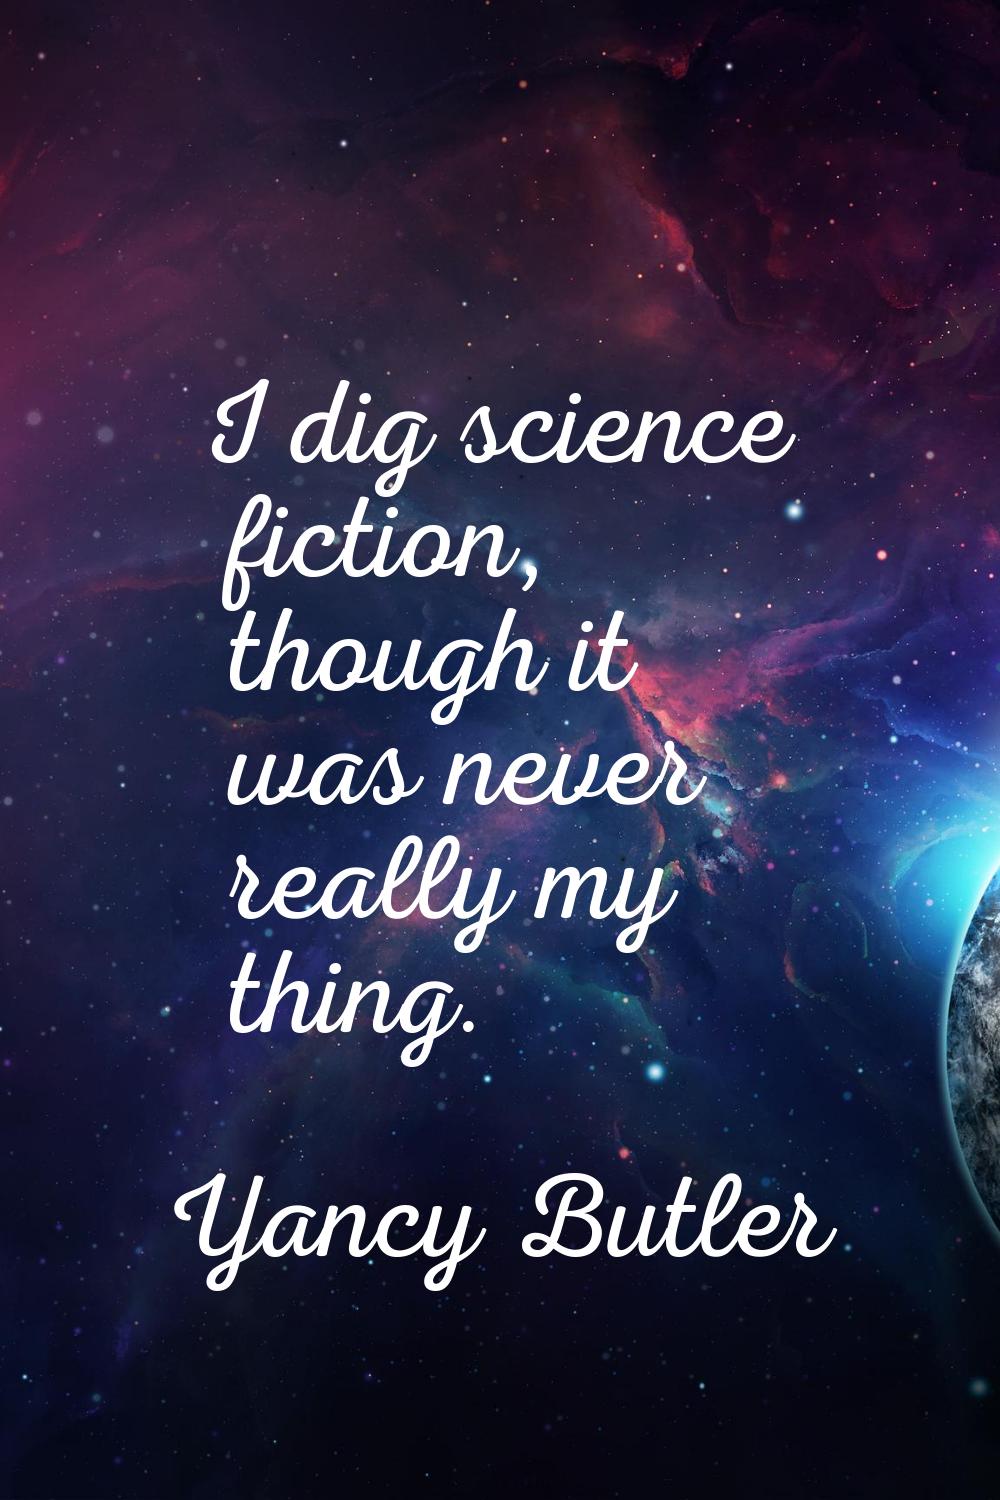 I dig science fiction, though it was never really my thing.